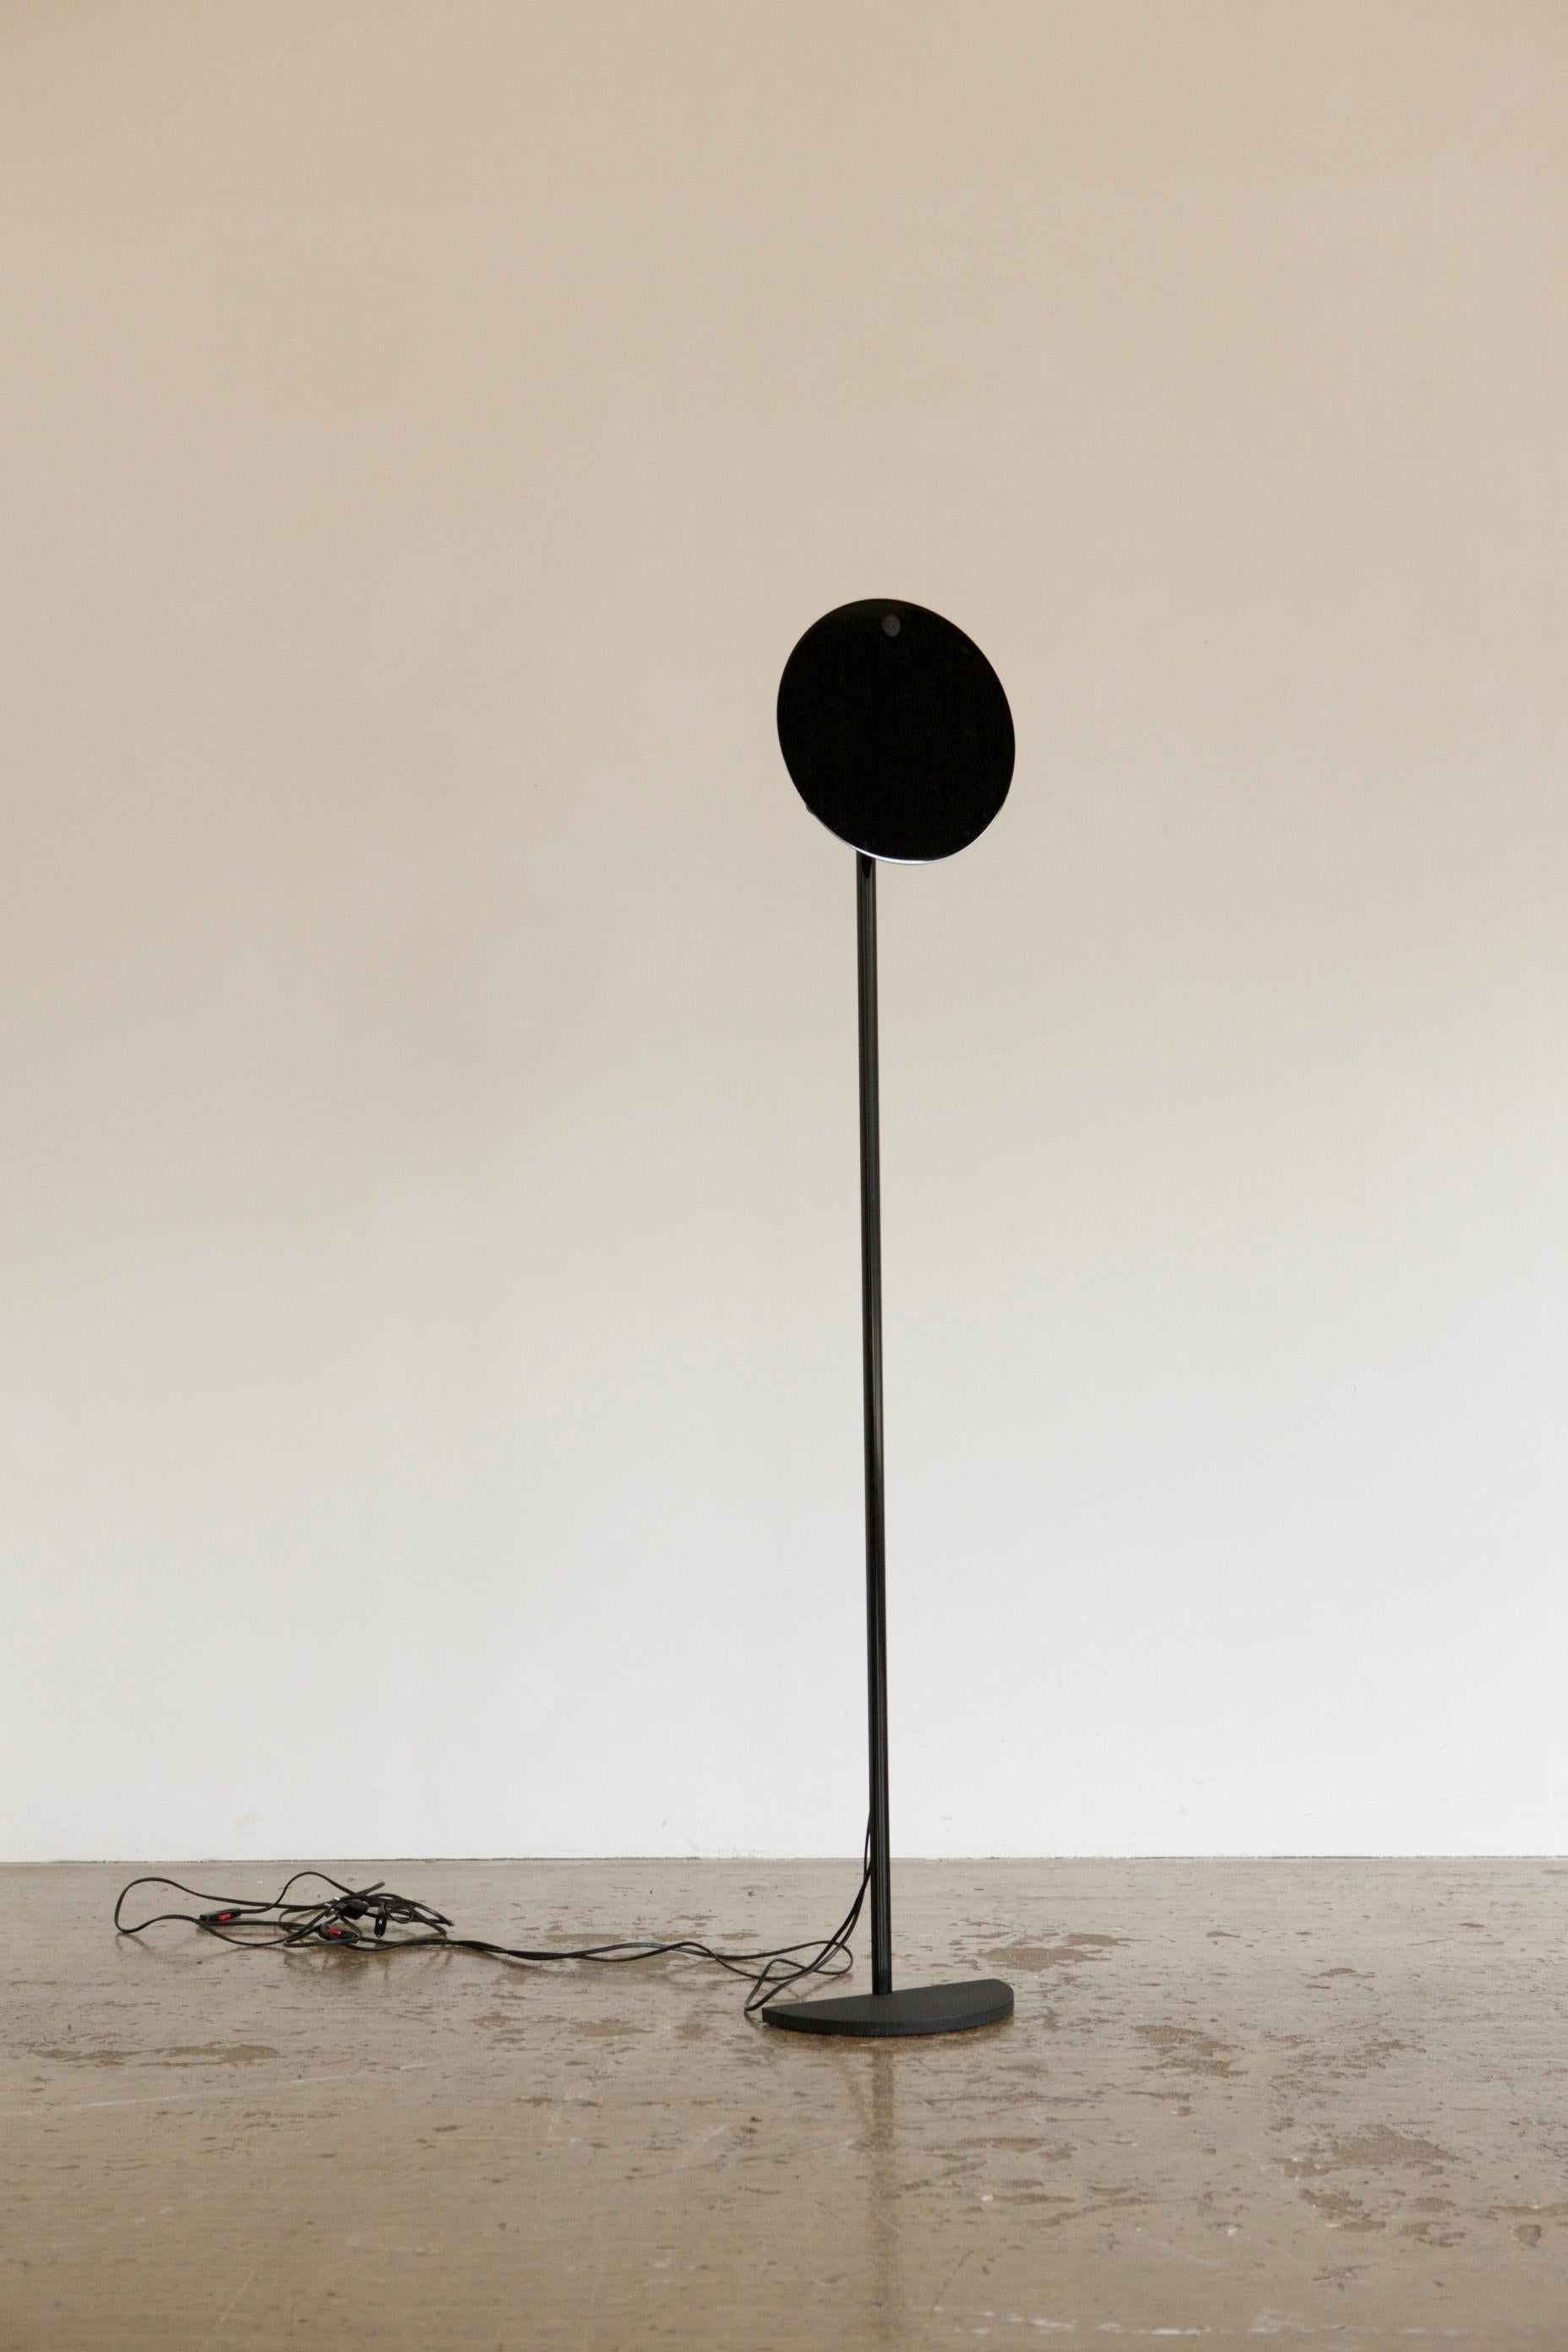 Floor lamp by Vico Magistretti. Designed for Oluce as part of the Idomeneo series. The modular lamp breaks down and features a floating black disk as a shade concealing a bulb holder. A very small dent in the disk can be viewed in 5th picture.